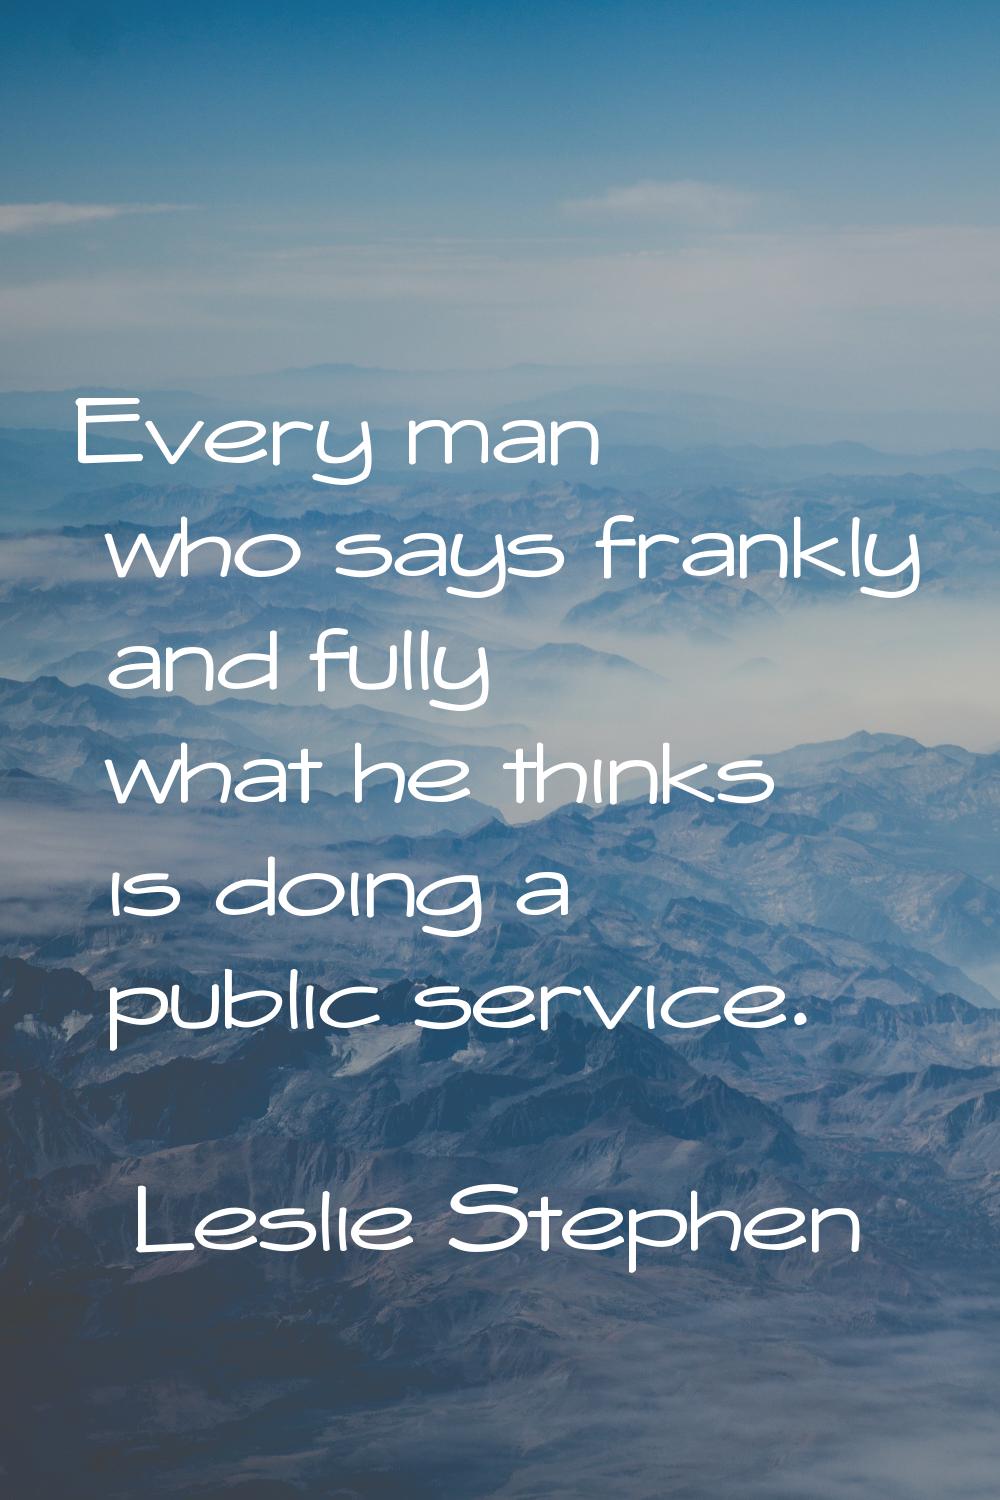 Every man who says frankly and fully what he thinks is doing a public service.